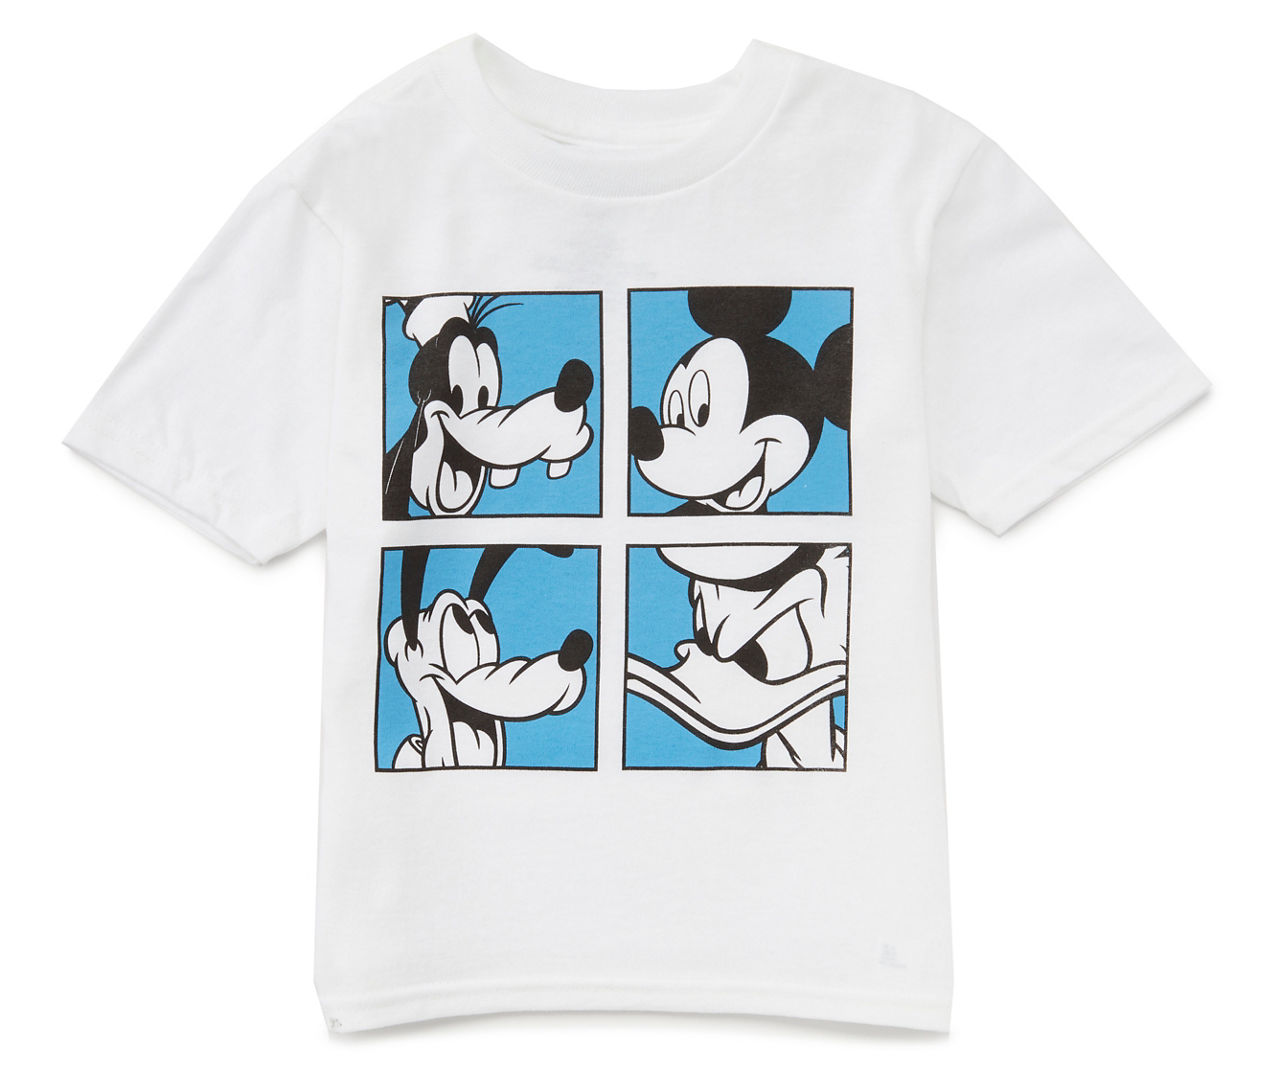 Toddler Boys' Mickey & Friends Graphic Tee, Size 4T